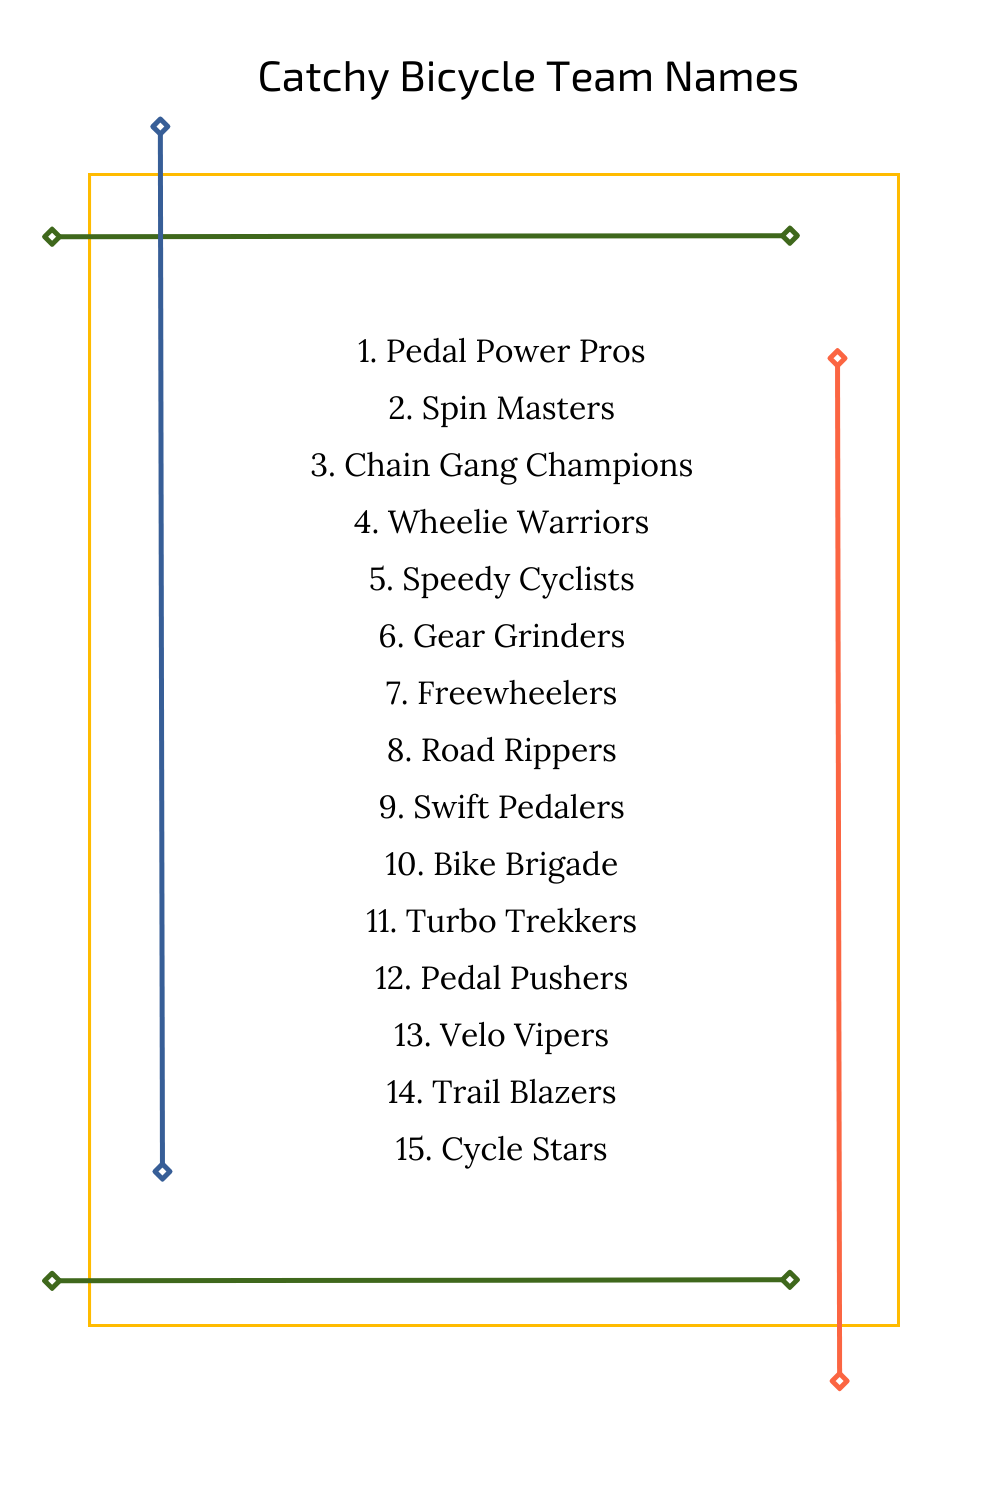 Catchy Bicycle Team Names